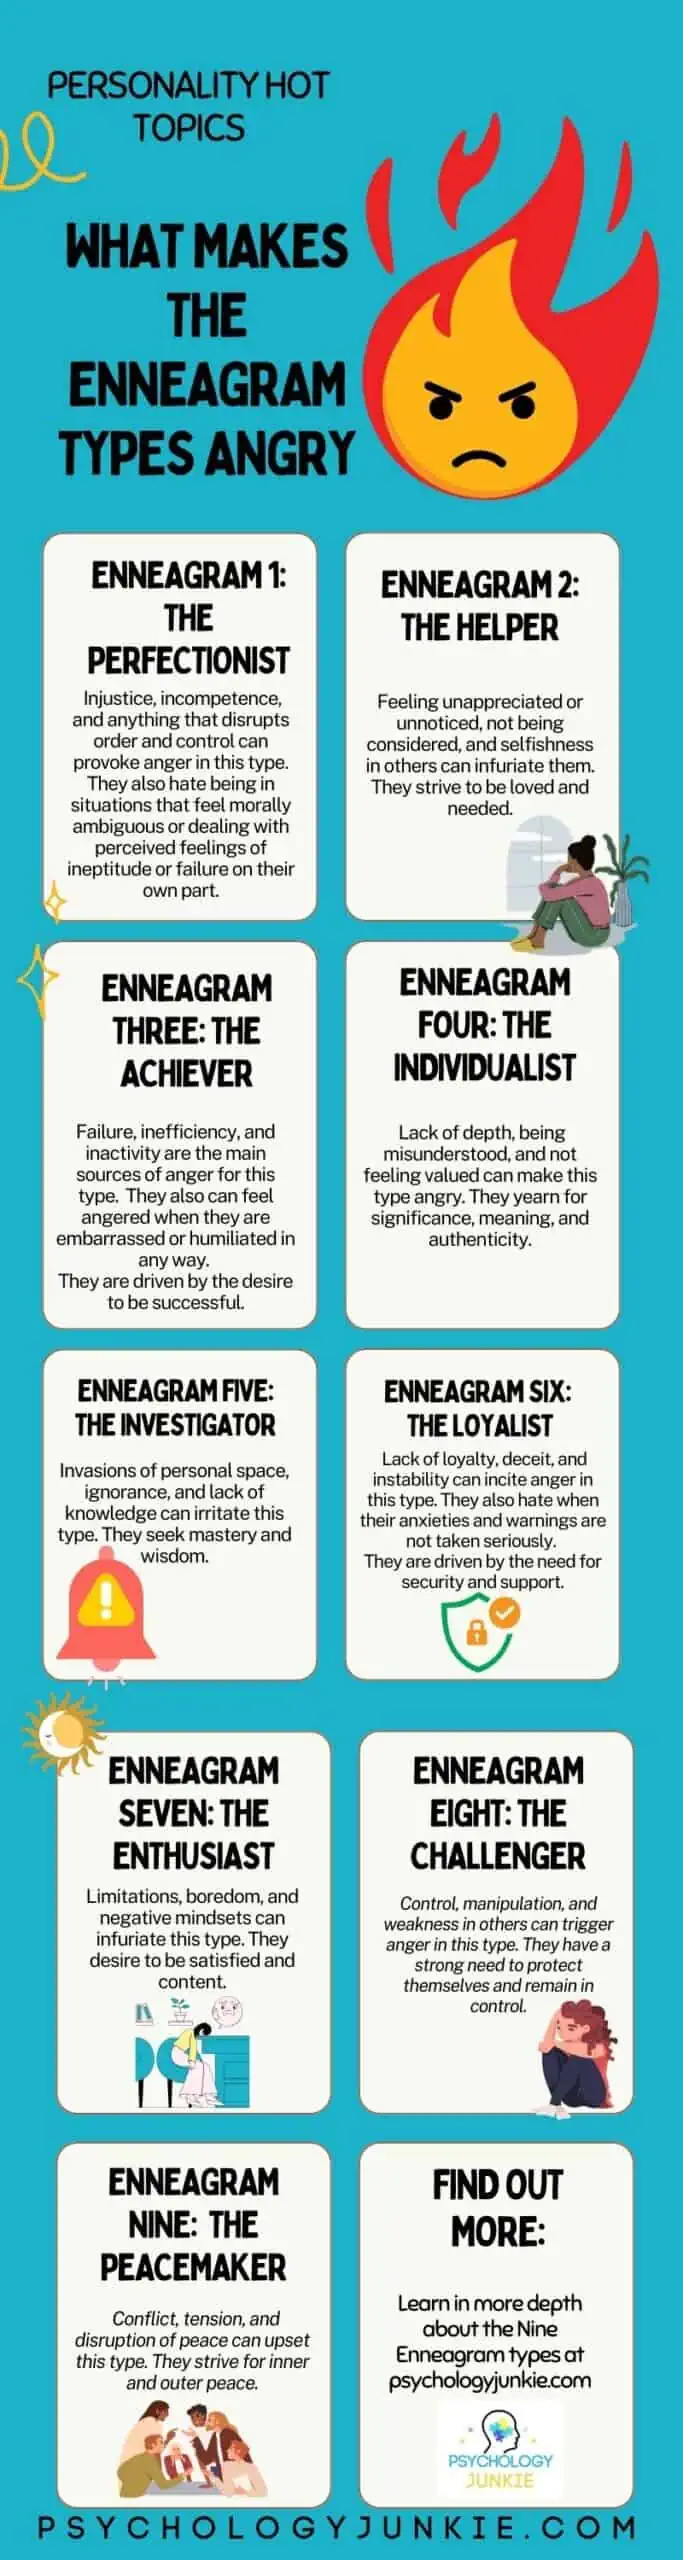 The enneagram types when they're angry. #Enneagram #Personality